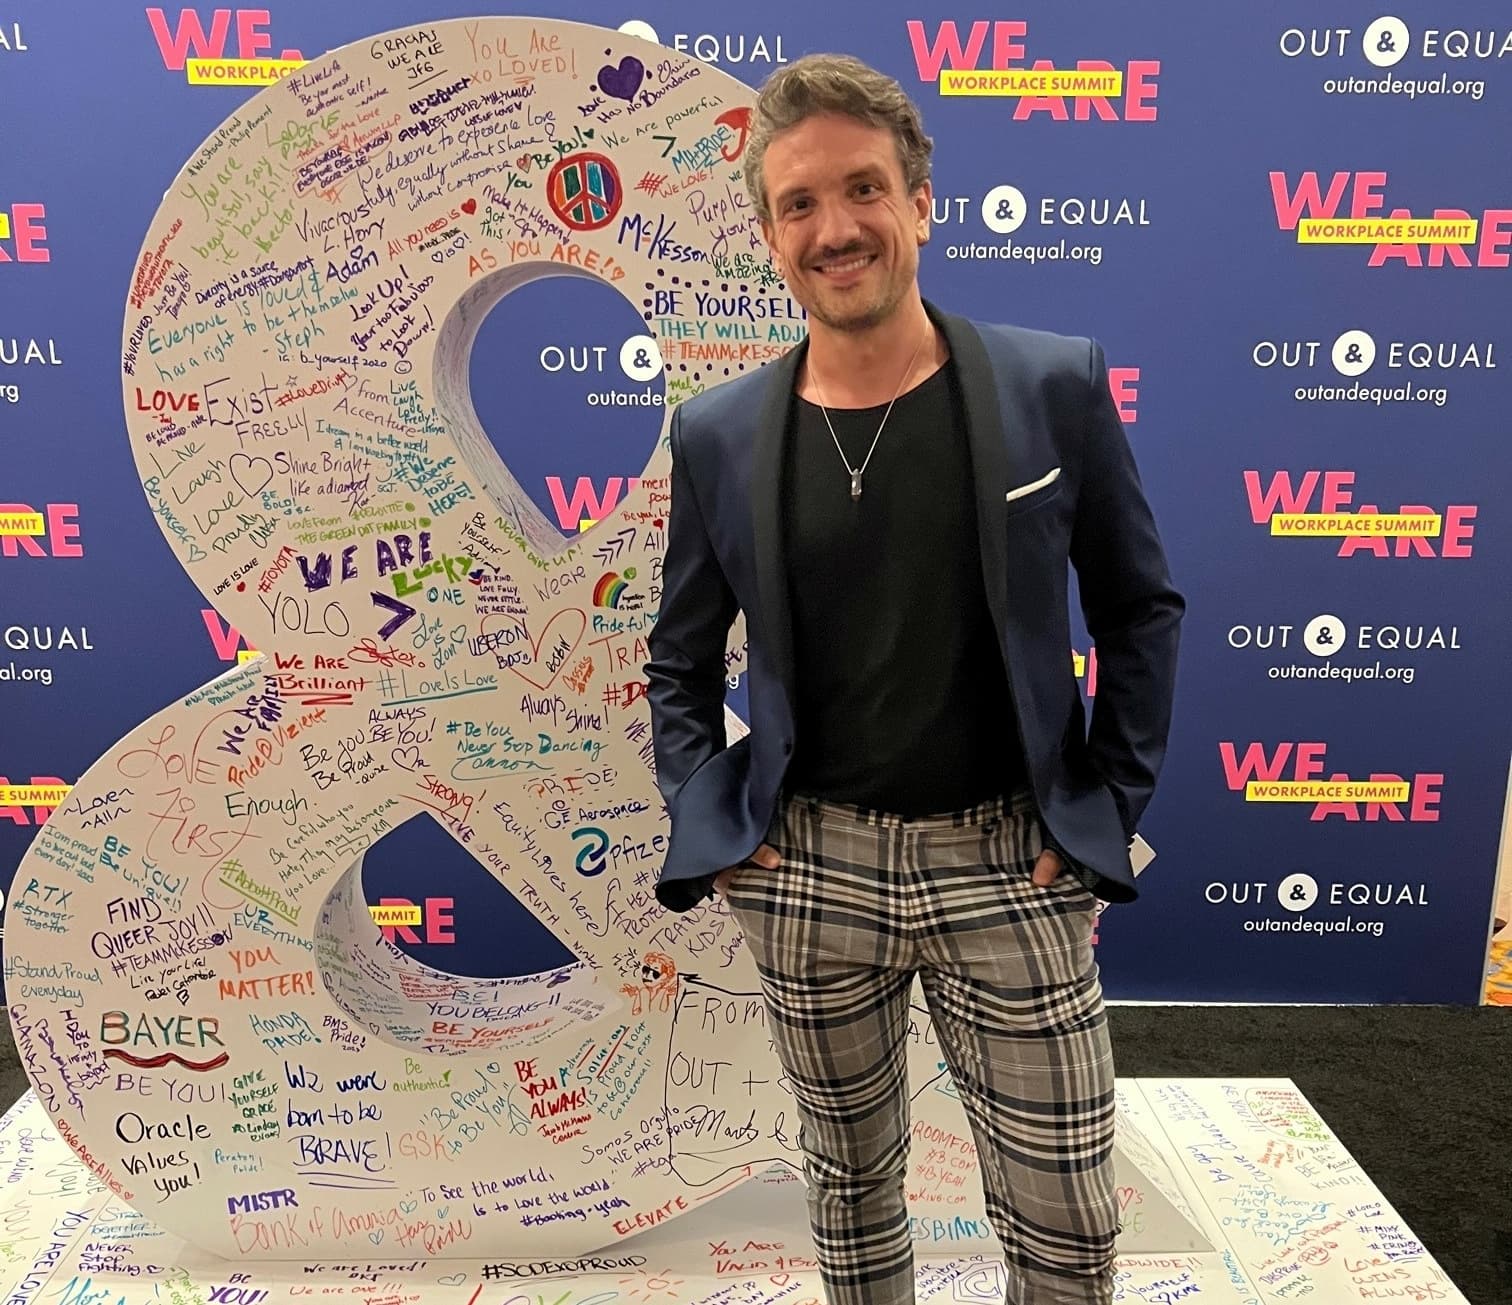 Weber Shandwick Q+ Chair-Elect John McCourt stands in front of a large white ampersand with various colored signatures at this year's Out & Equal conference.